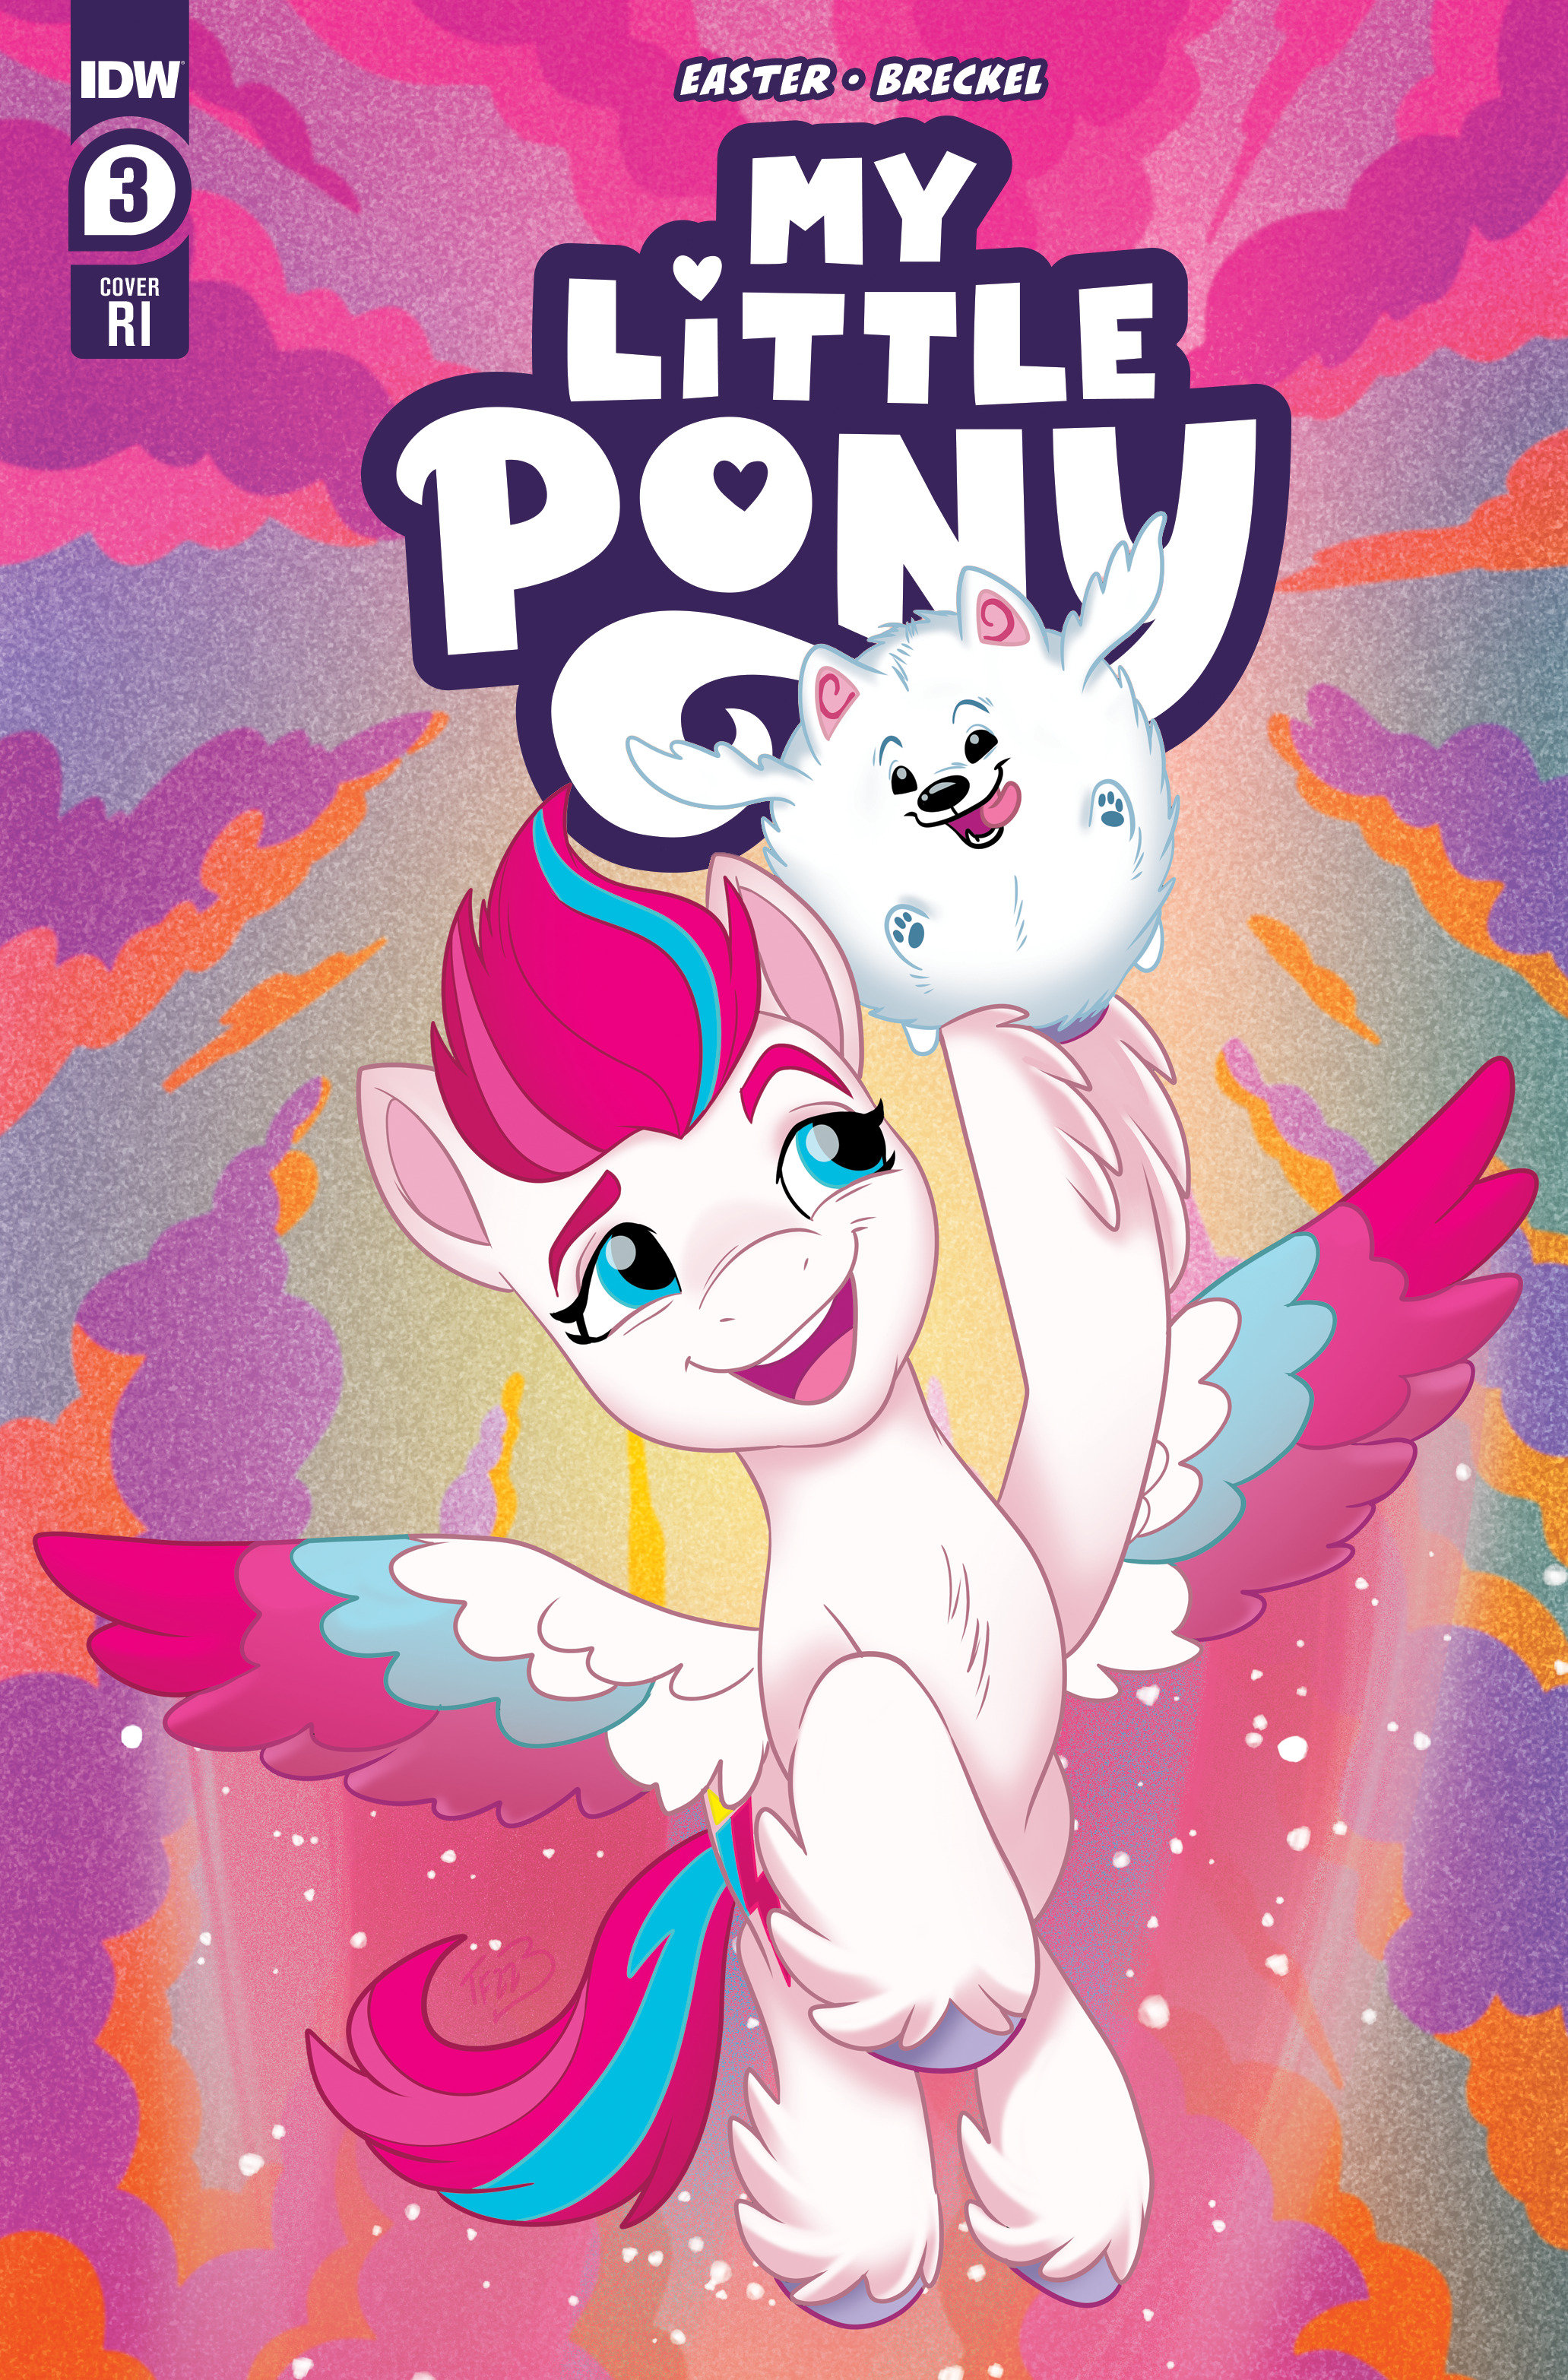 My Little Pony #3 Cover Retailer Incentive Easter 1 For 10 Variant